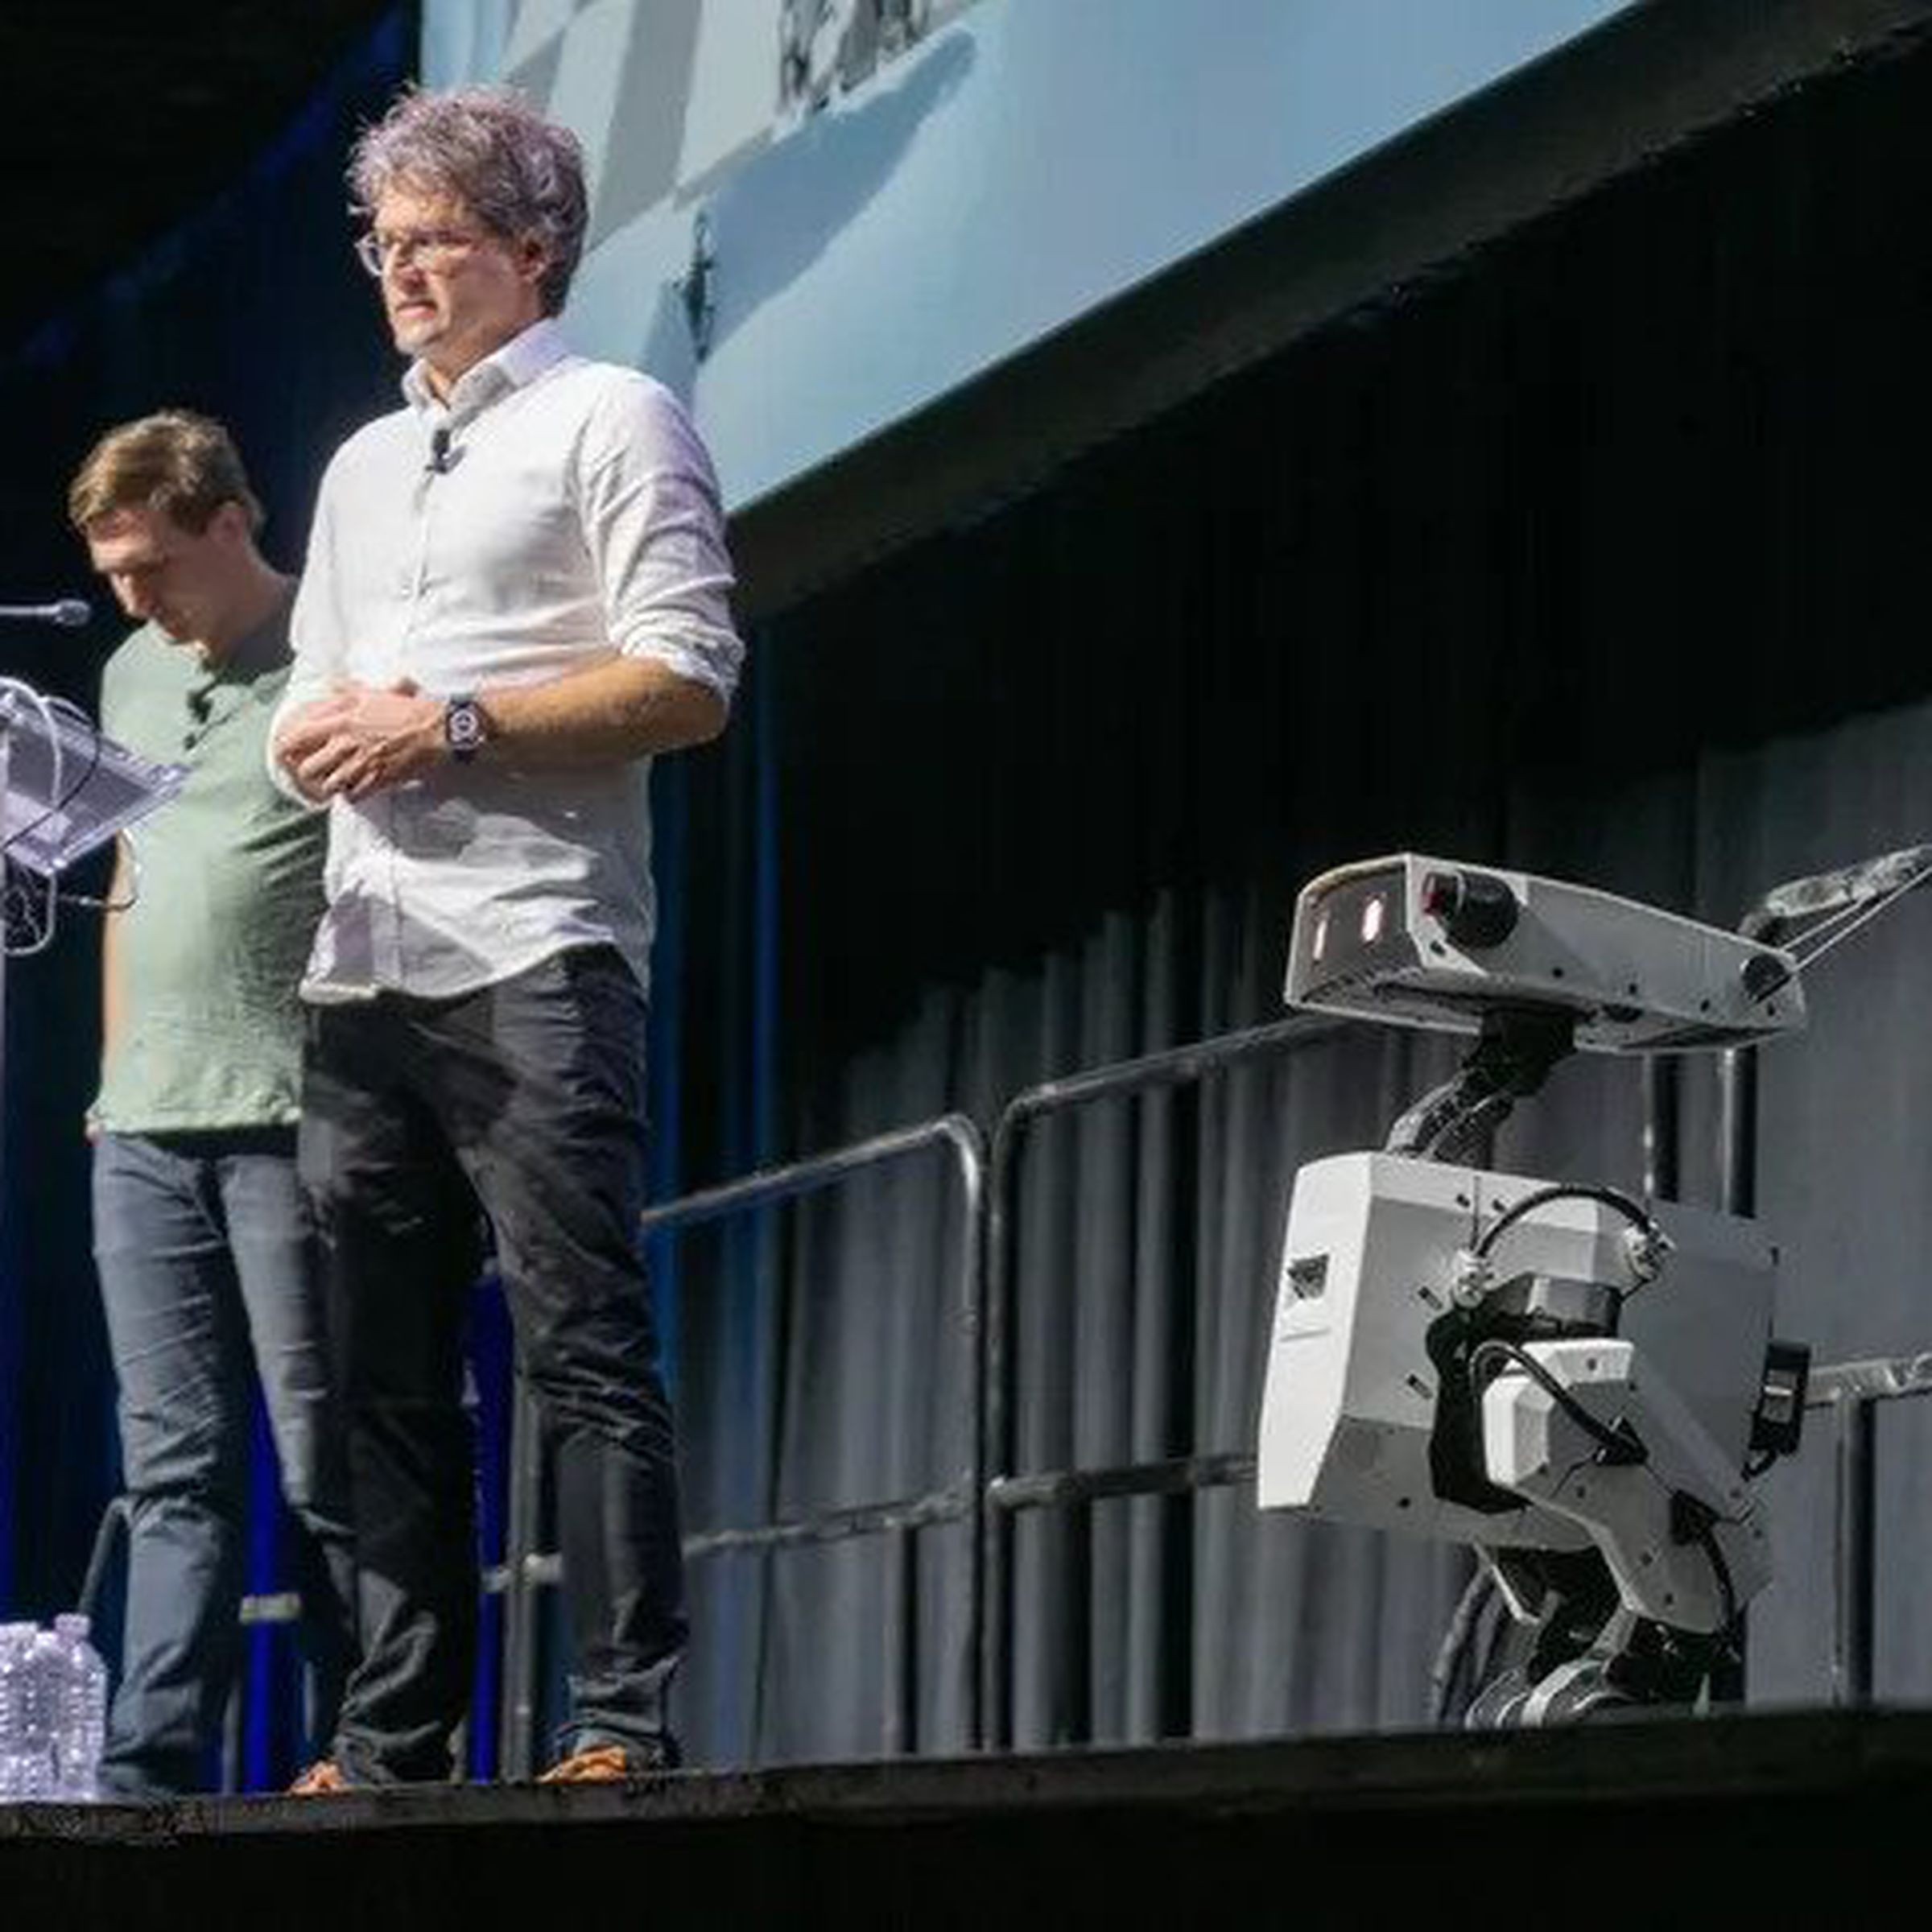 Two men appear in the background presenting an adorable bipedal concept robot, which stands in the foreground.